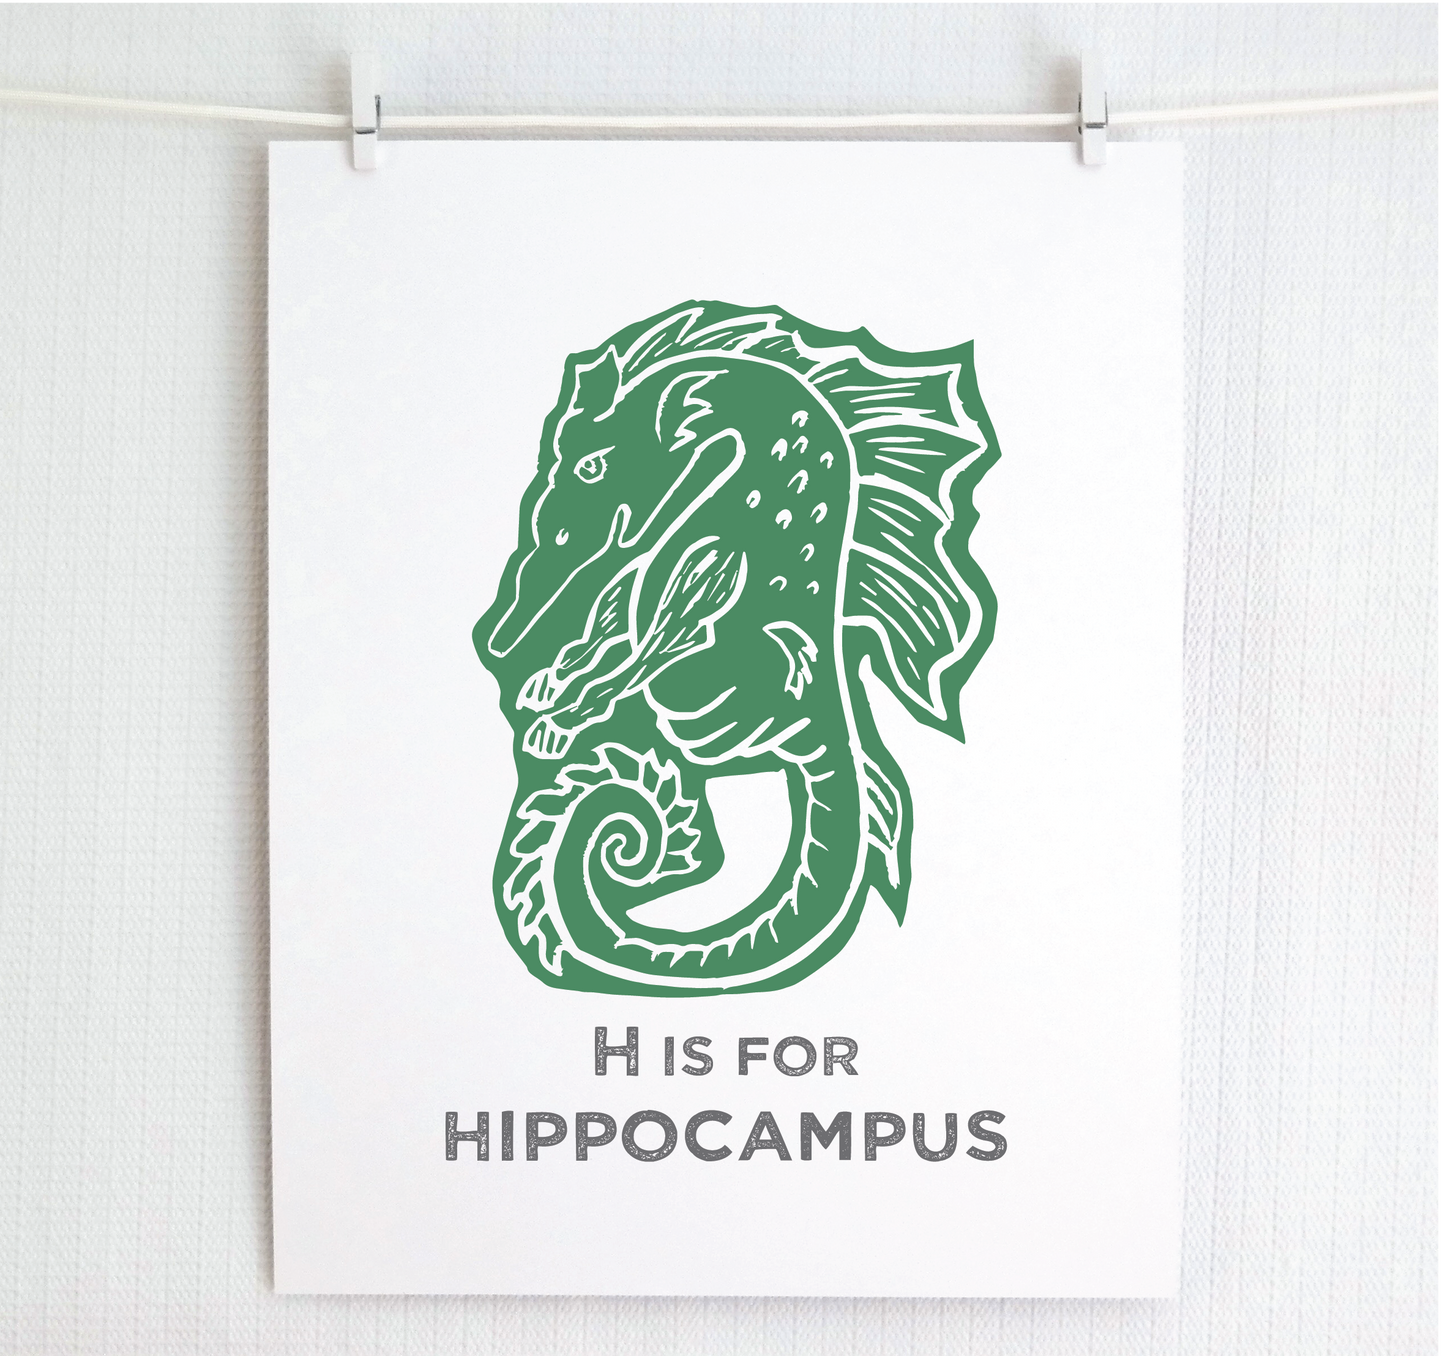 H is for Hippocampus